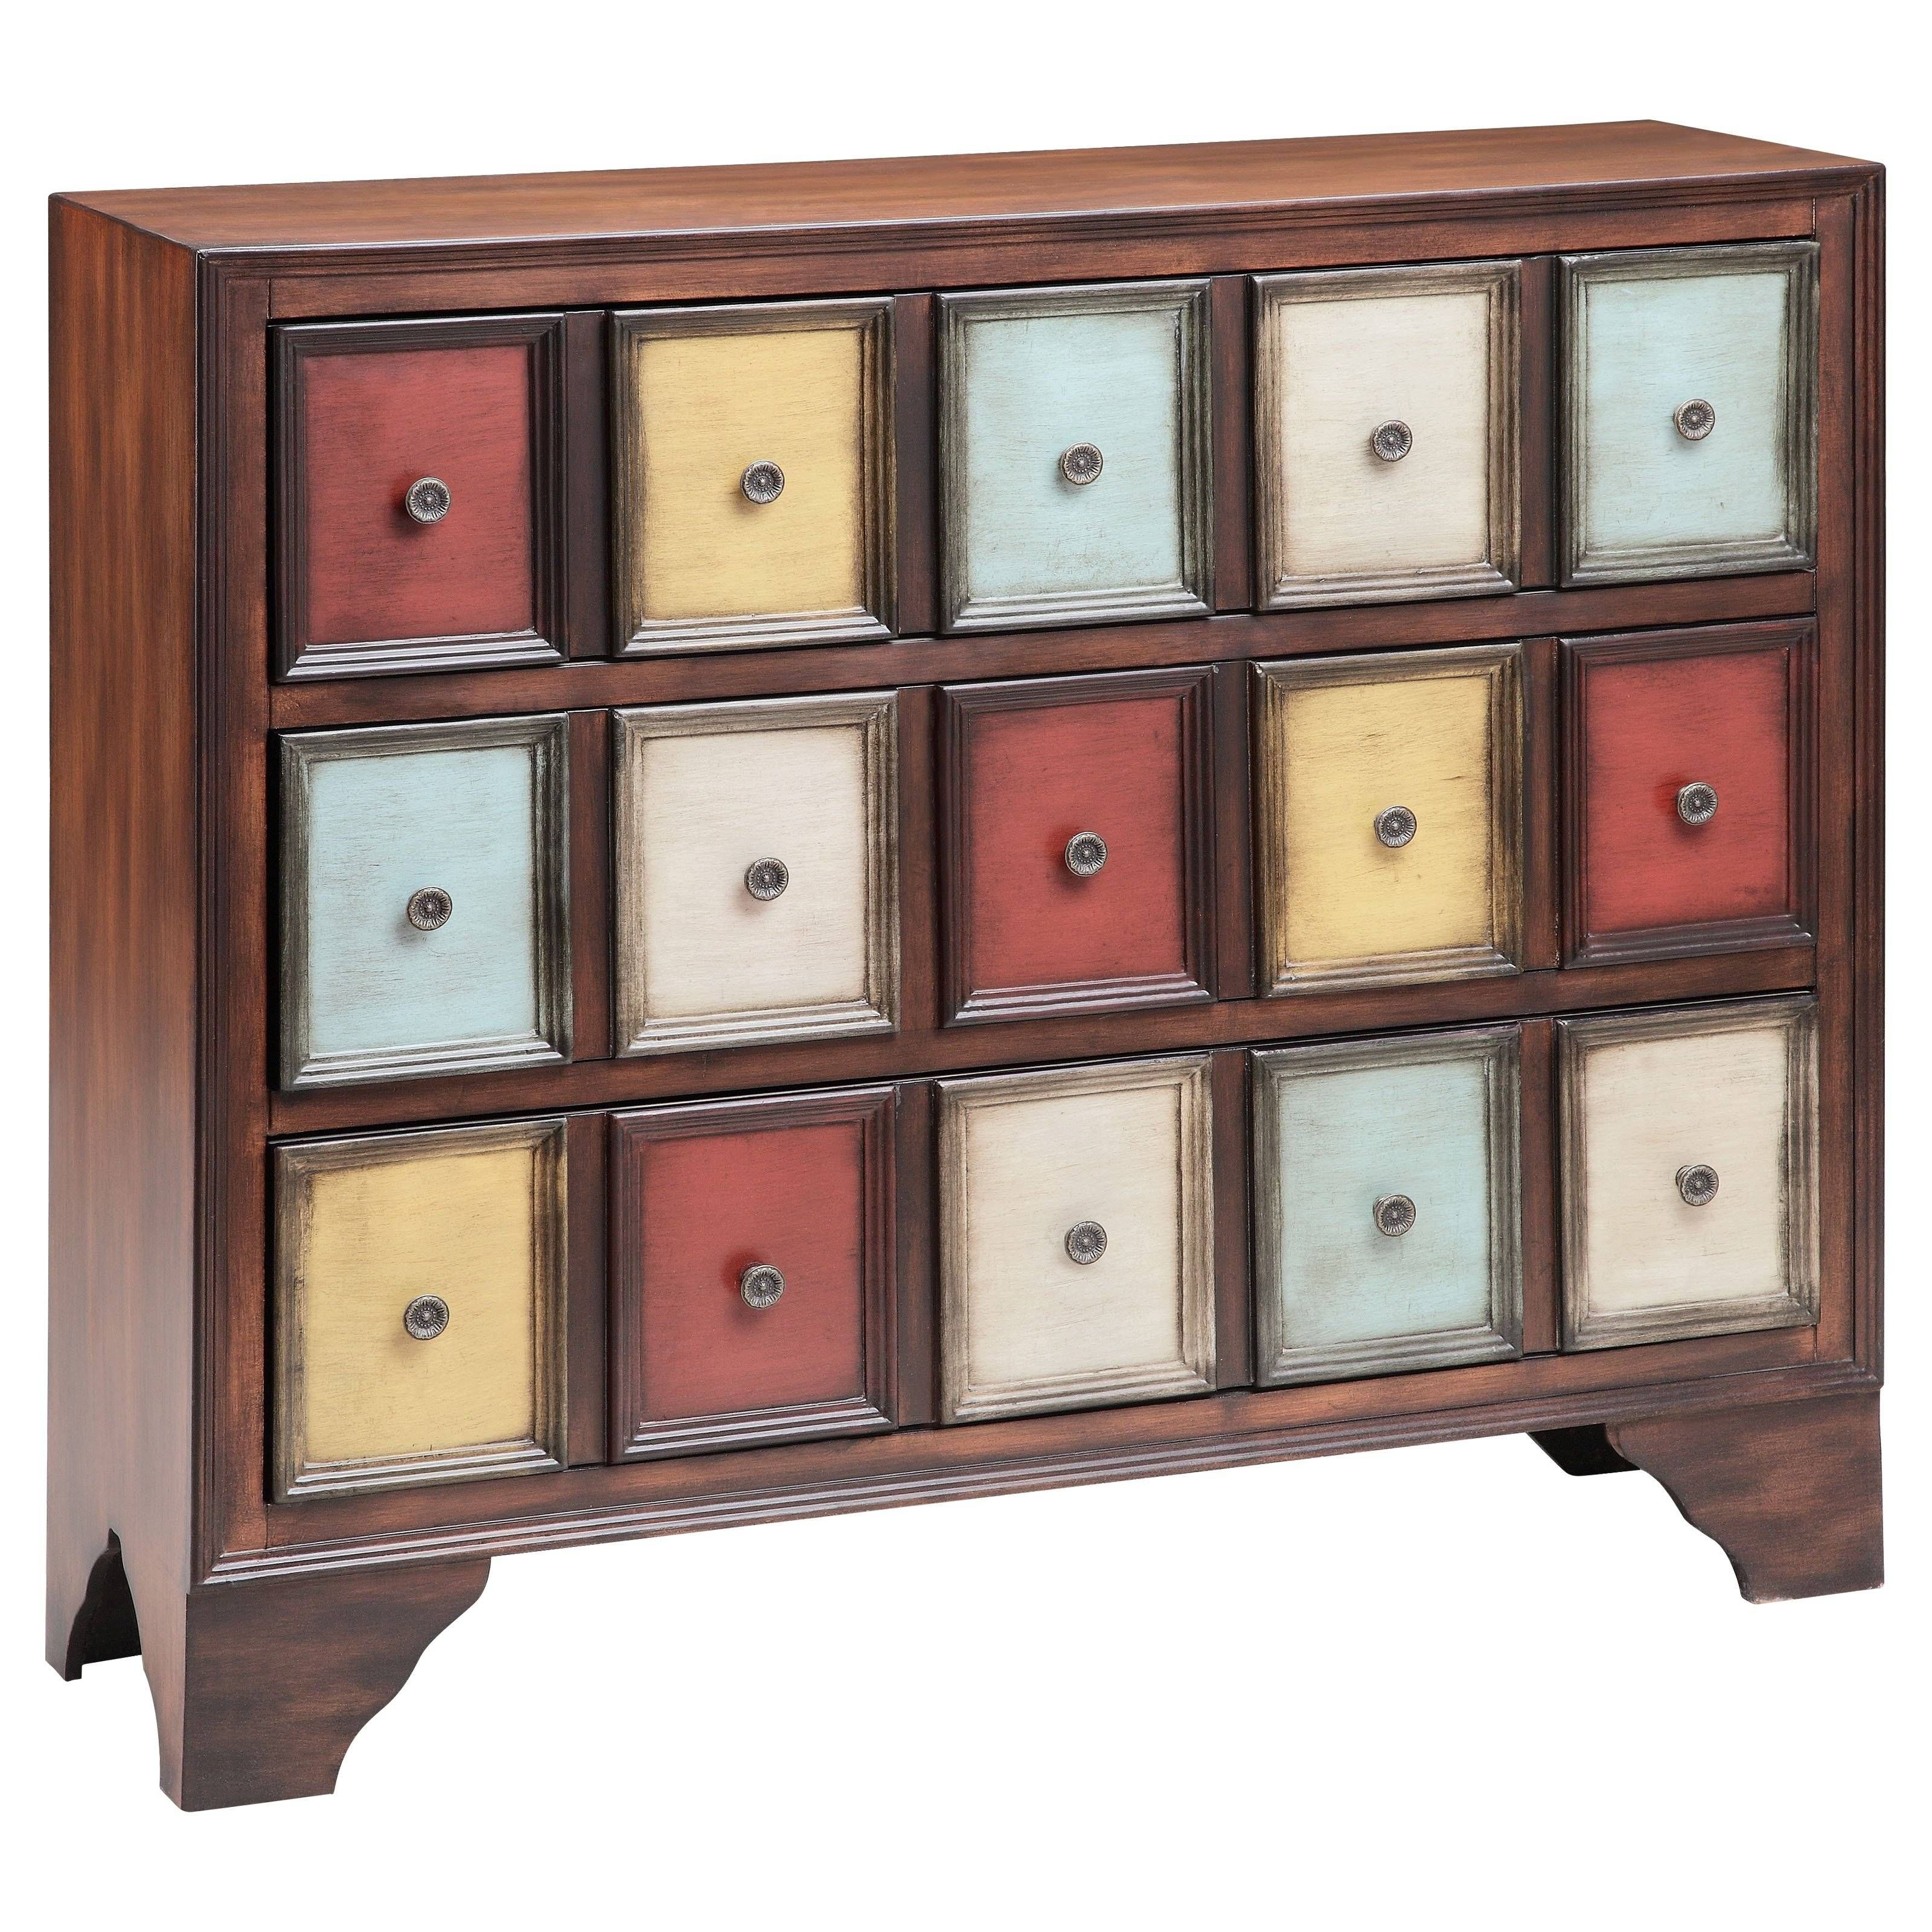 Stein World 12367 3 Drawer Multi Color Chest | Hayneedle For Multi Drawer Sideboards (View 27 of 30)